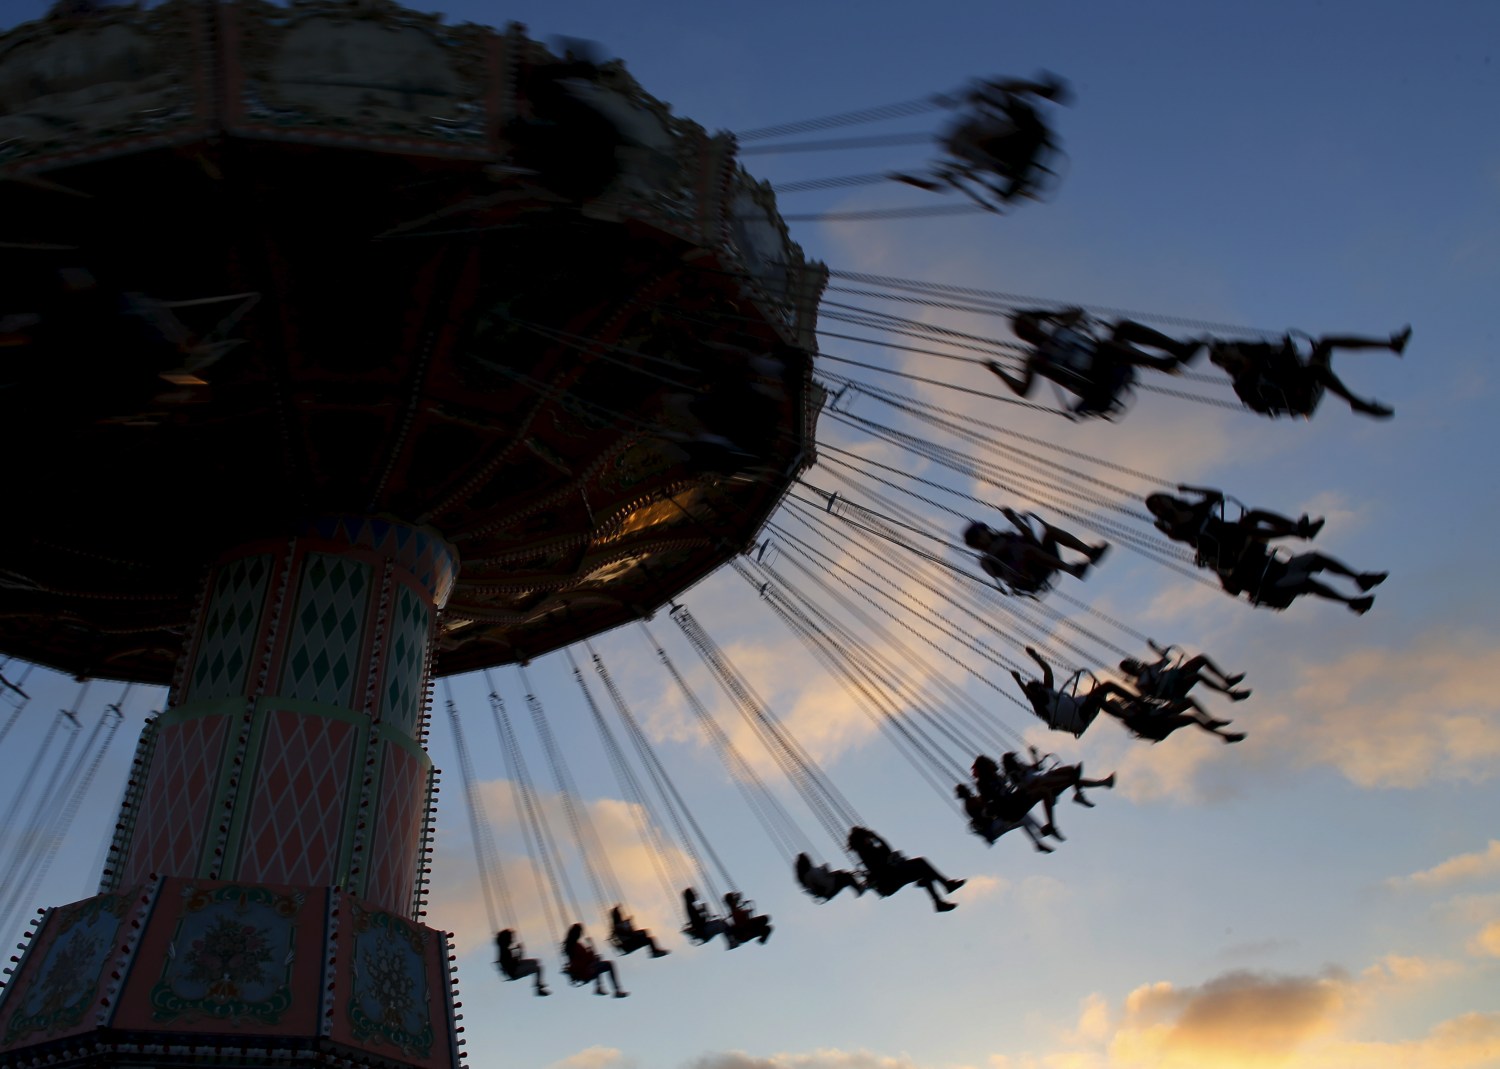 Fair-goers enjoy a ride as the sun sets at the annual San Diego County Fair in Del Mar, California June 25, 2015. REUTERS/Mike Blake TPX IMAGES OF THE DAY - GF10000139524